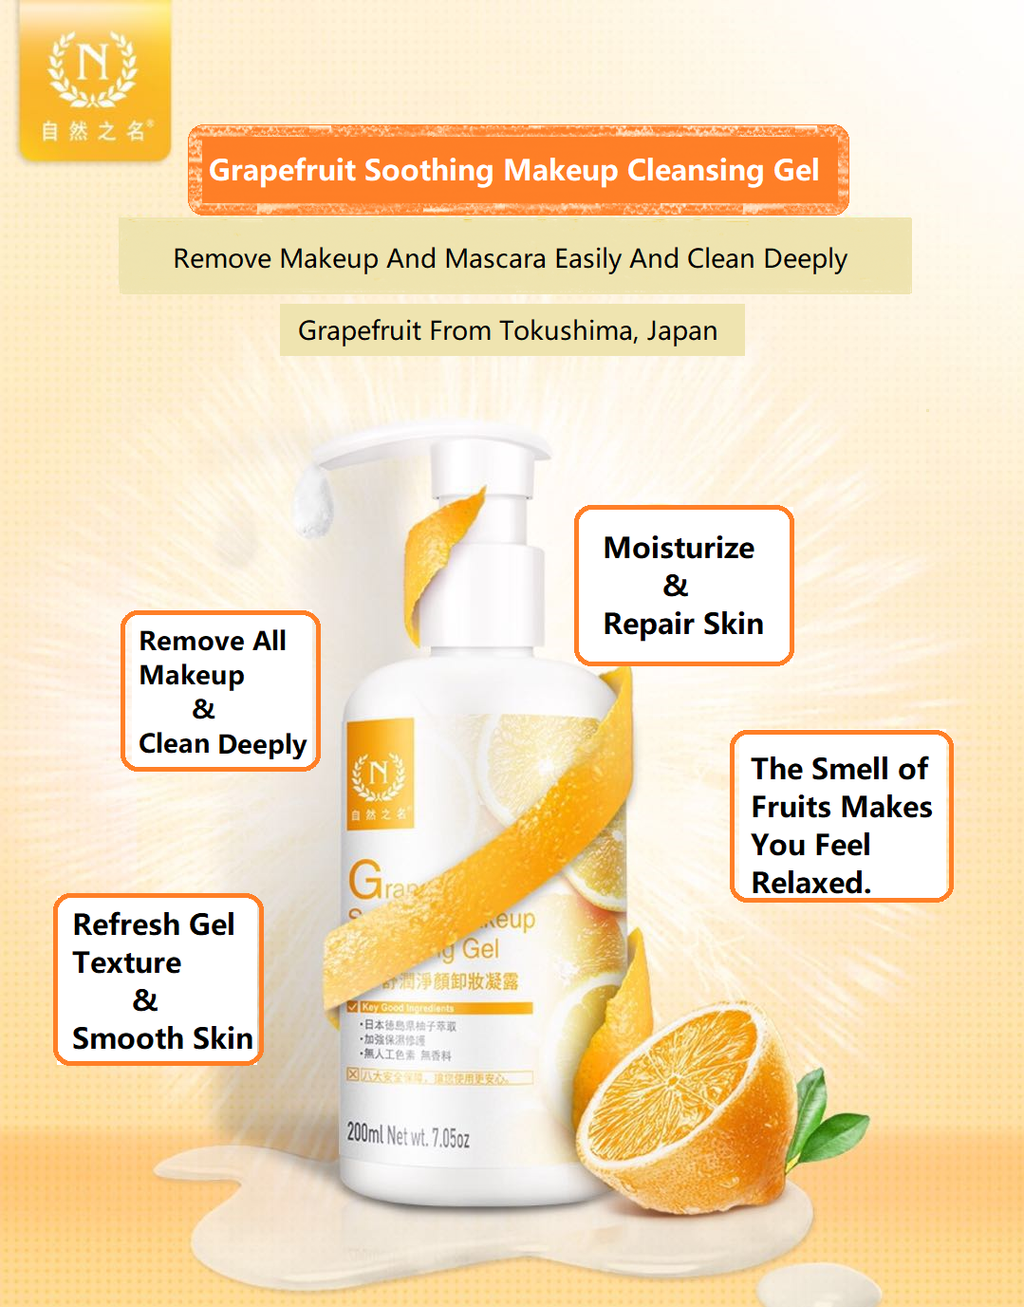 How awesome is the Grapefruit Makeup Cleansing Gel ?!